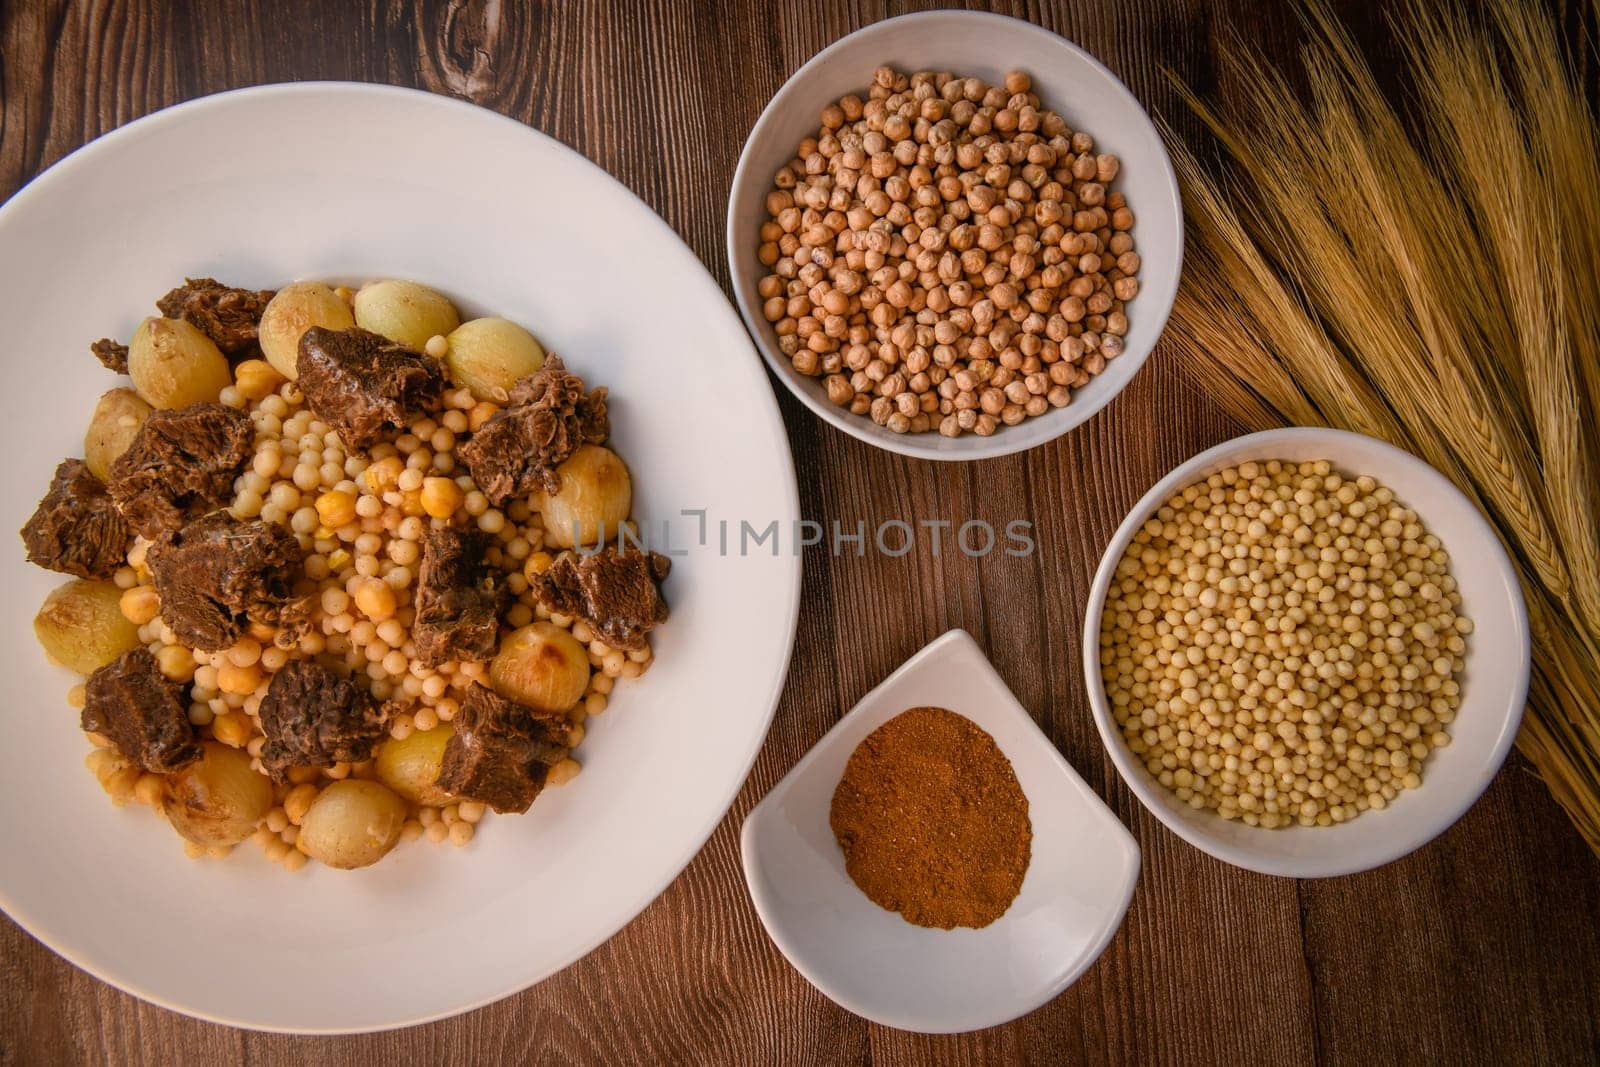 Moughrabieh is a popular dish in the Lebanese cuisine, LEBANESE RECIPE FOR MOUGHRABIEH WITH BEEF AND SMALL ONIONS, SEMOLINA PEARLS AND CHICKPEAS. High quality photo